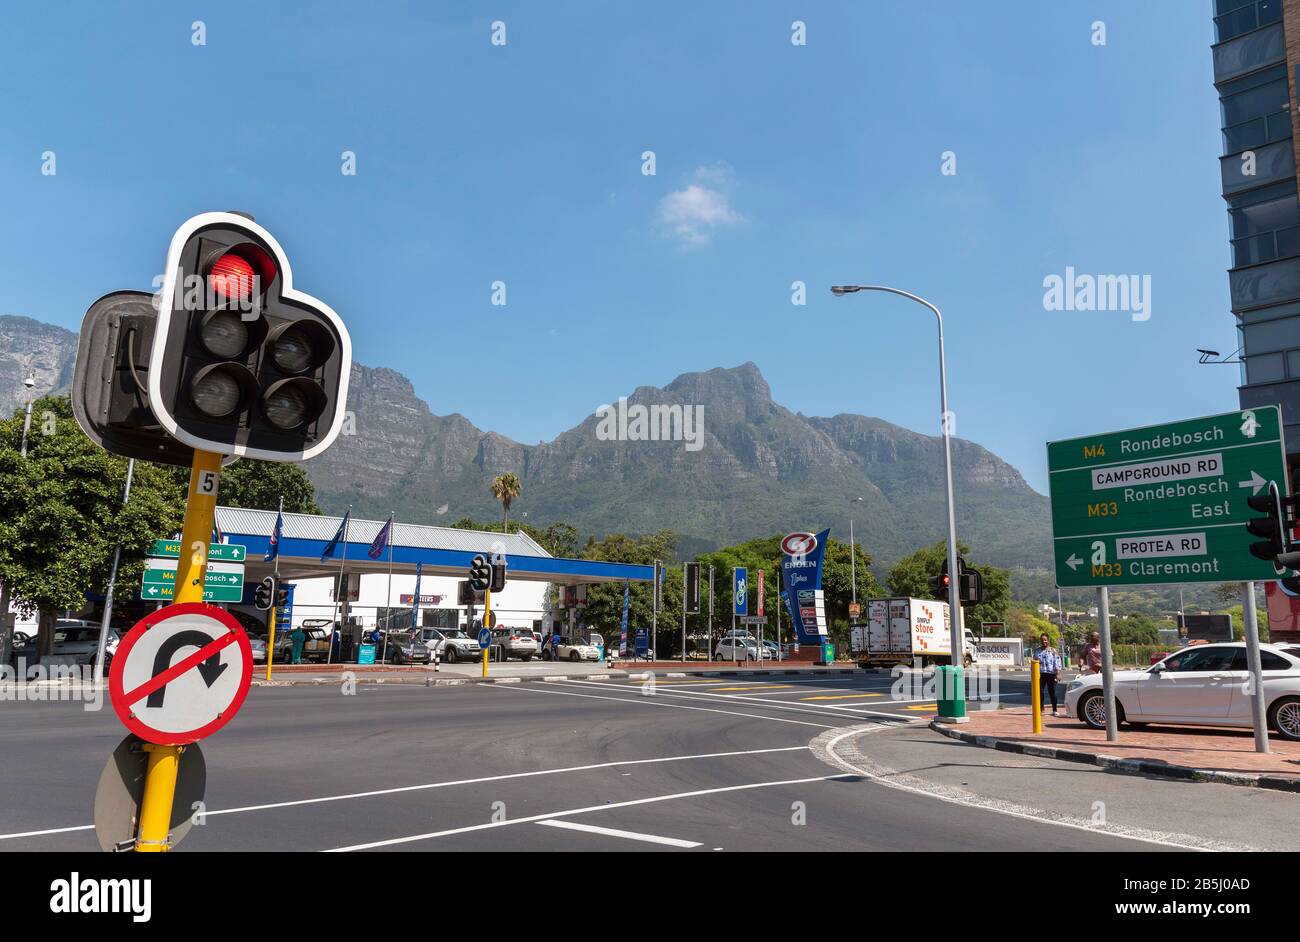 Newlands, Cape Town, South Africa. Dec 2019. Newlands a suburb of Cape Town situated on the oppisite side of Table Mountain. Road junction of M33 Stock Photo